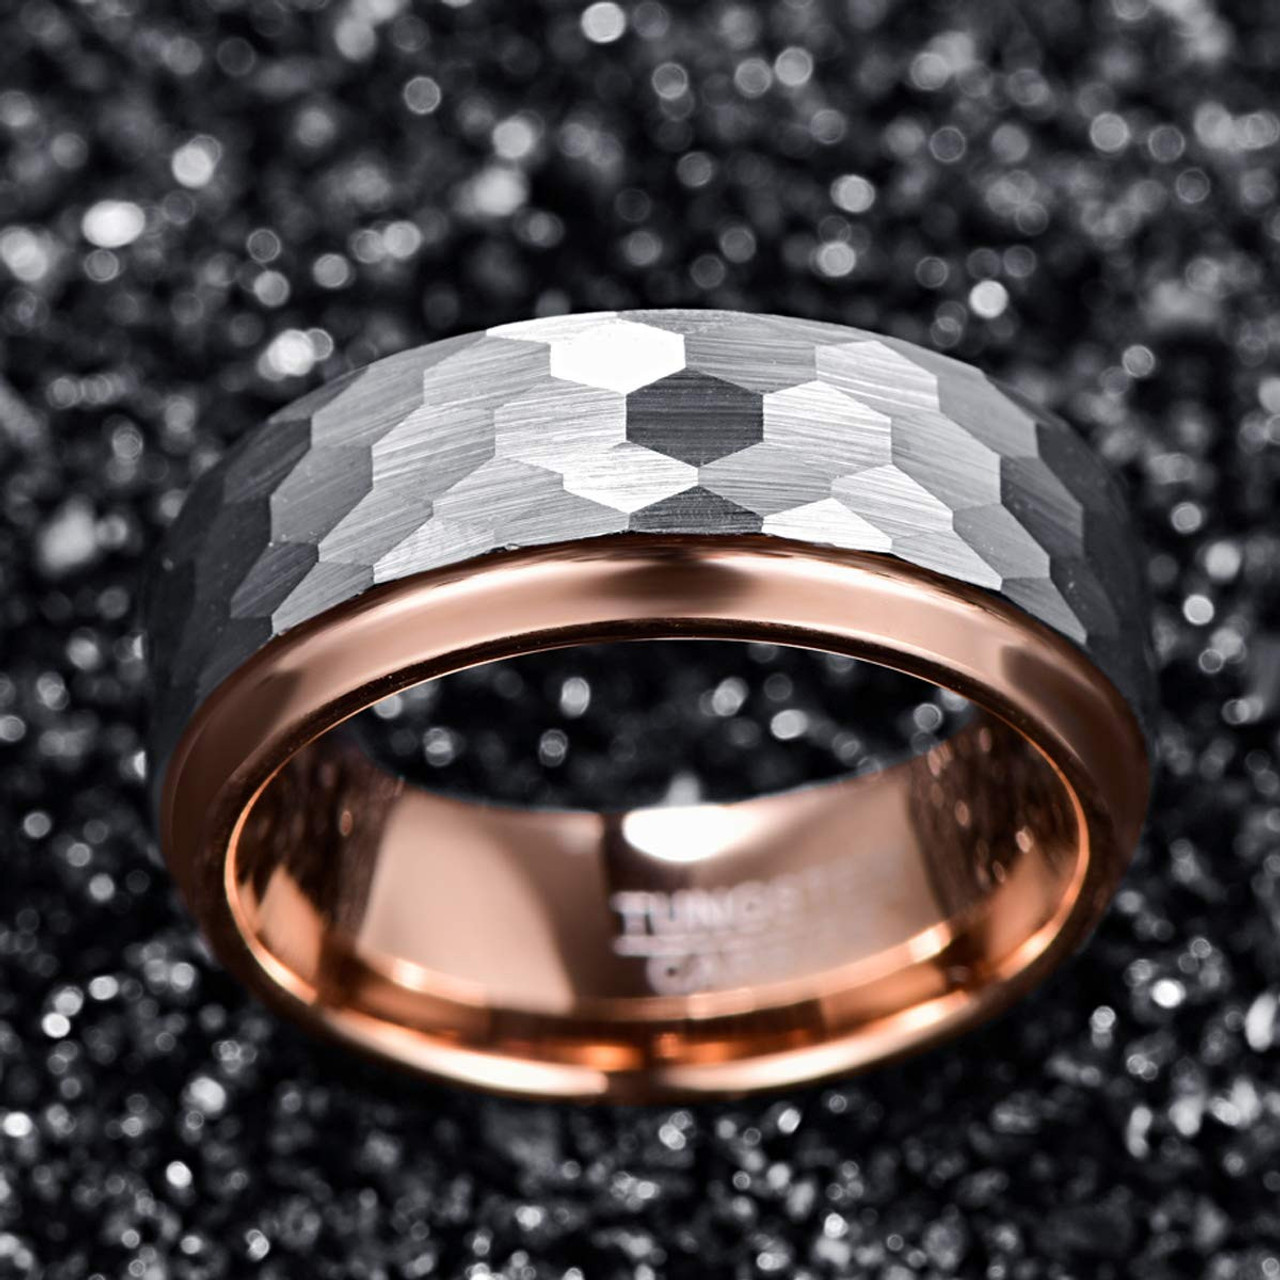 Womens or Mens Tungsten Wedding Band (8mm). Matte Silver and Rose Gold Hammered Finish Tungsten Carbide Ring with one visible edge.